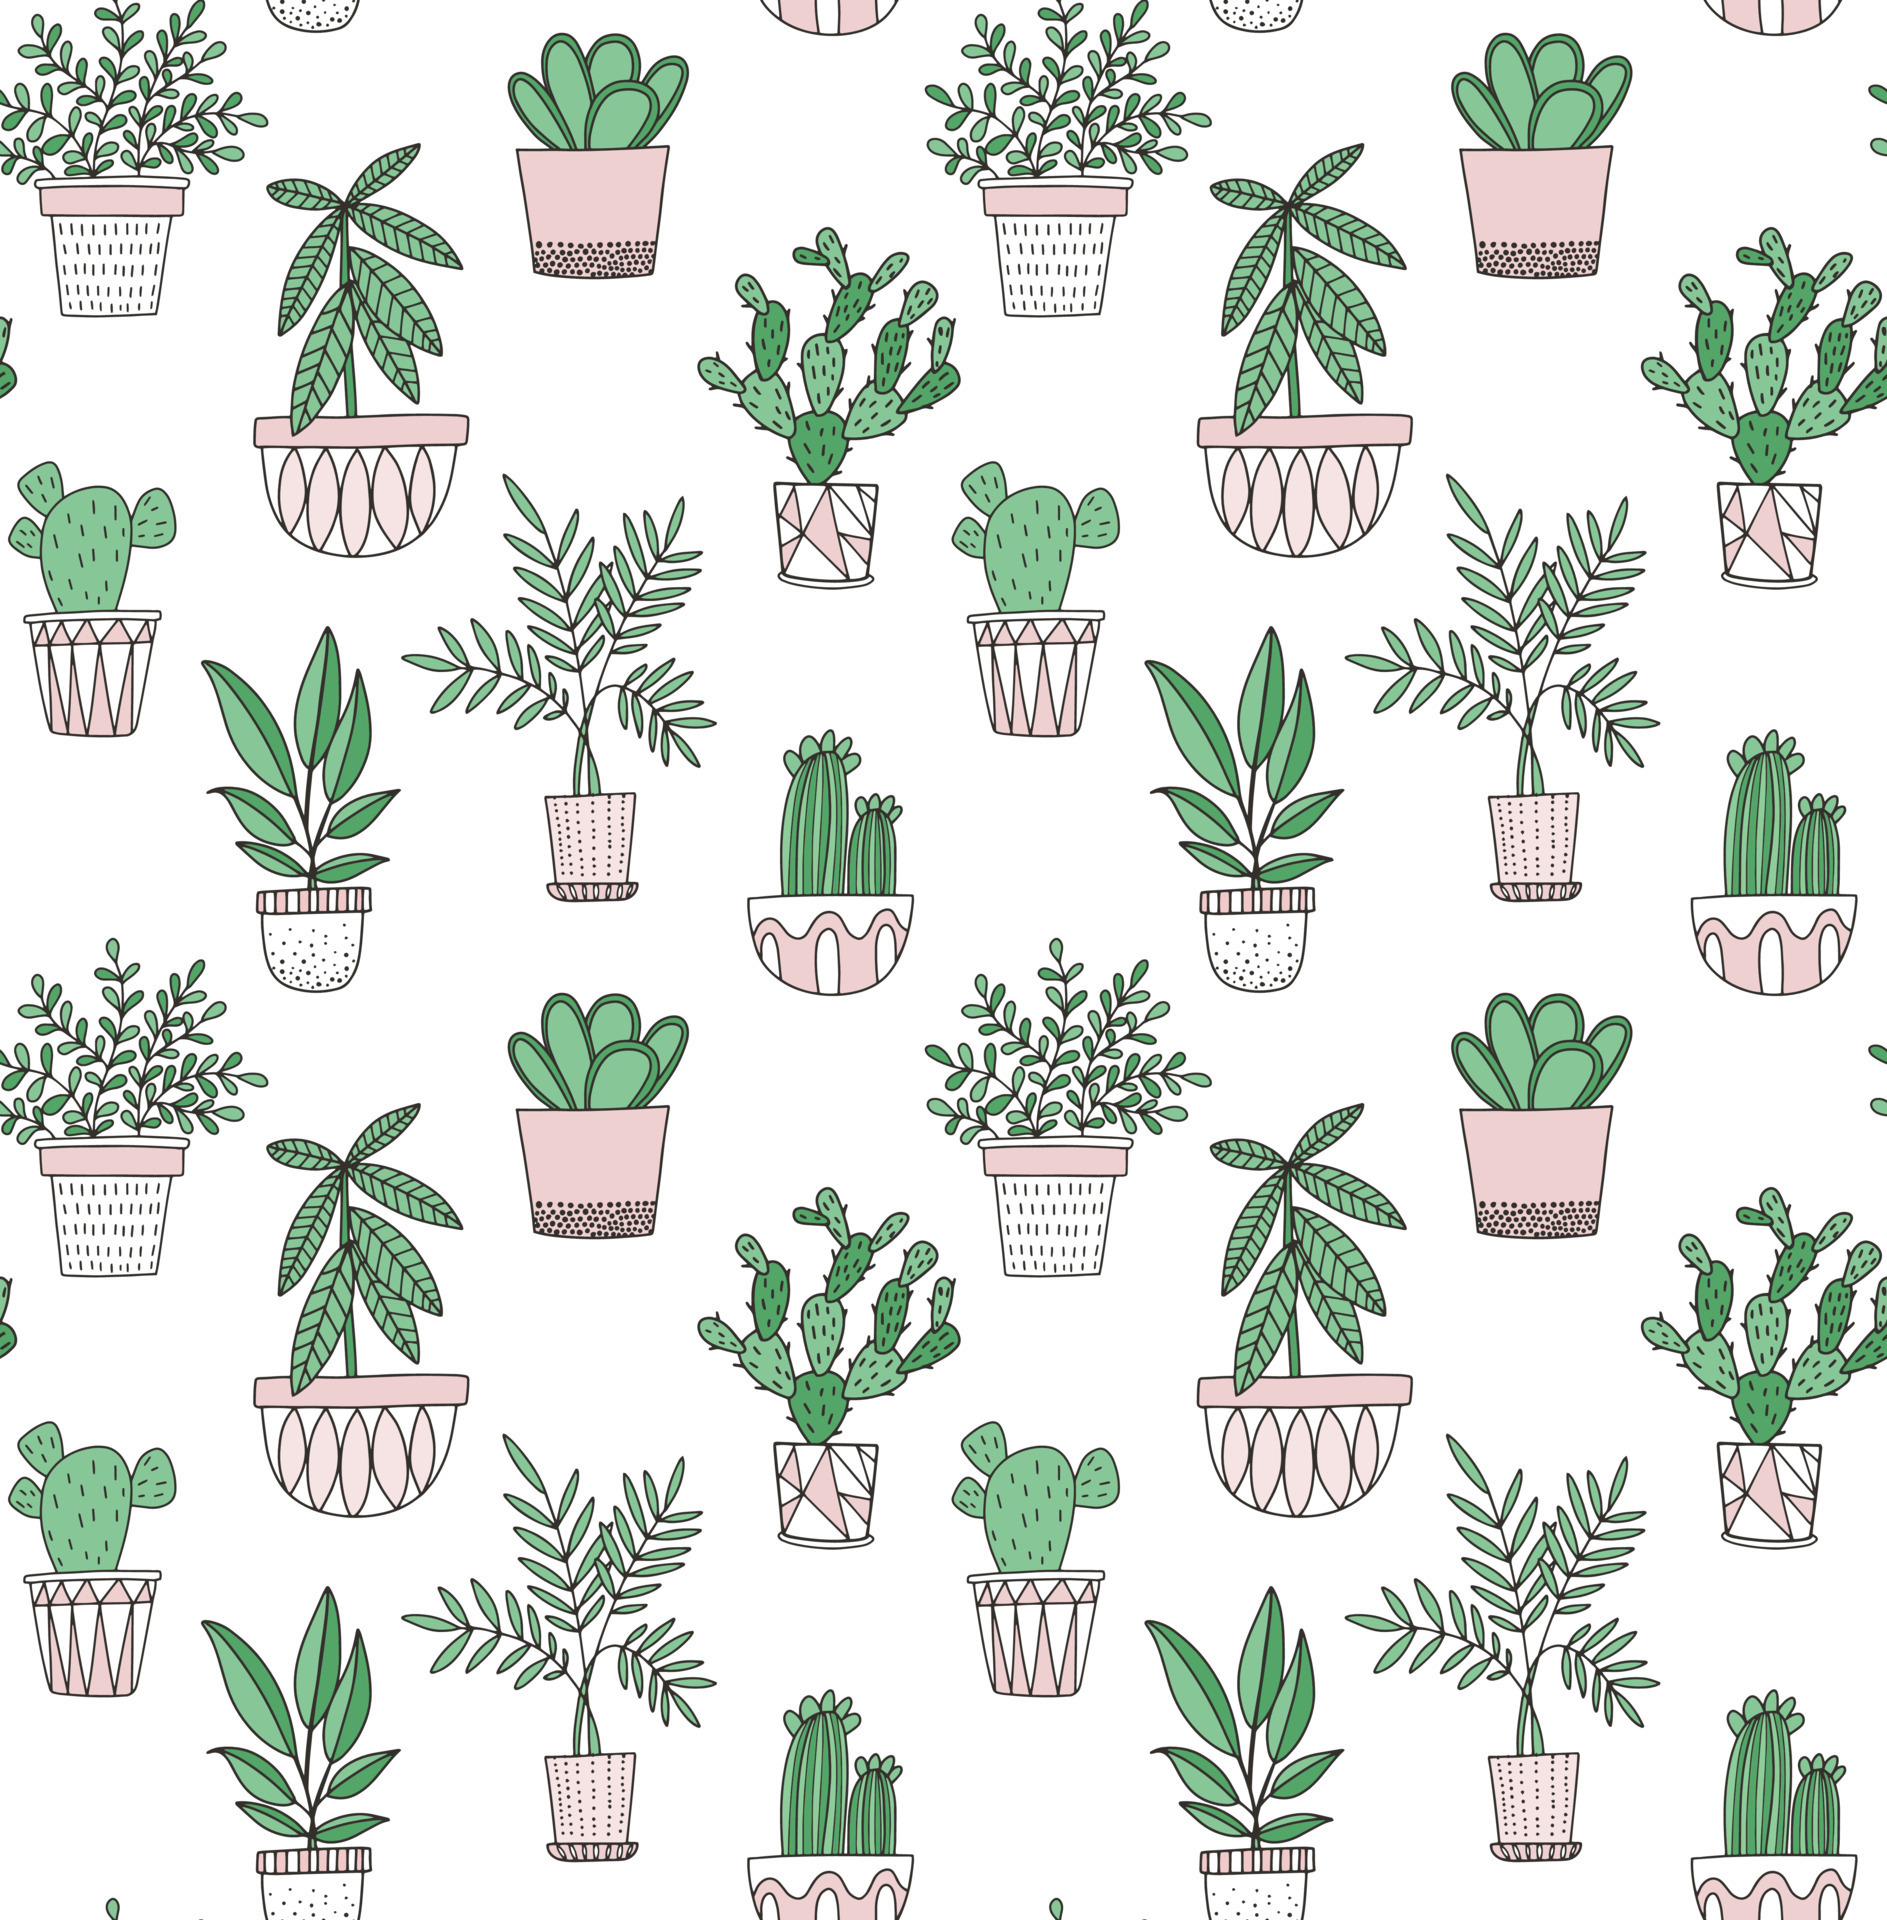 Potted plants vector pattern in doodle scandinavian style. Succulents, cacti and other house plants in geometric pots. Seamless background